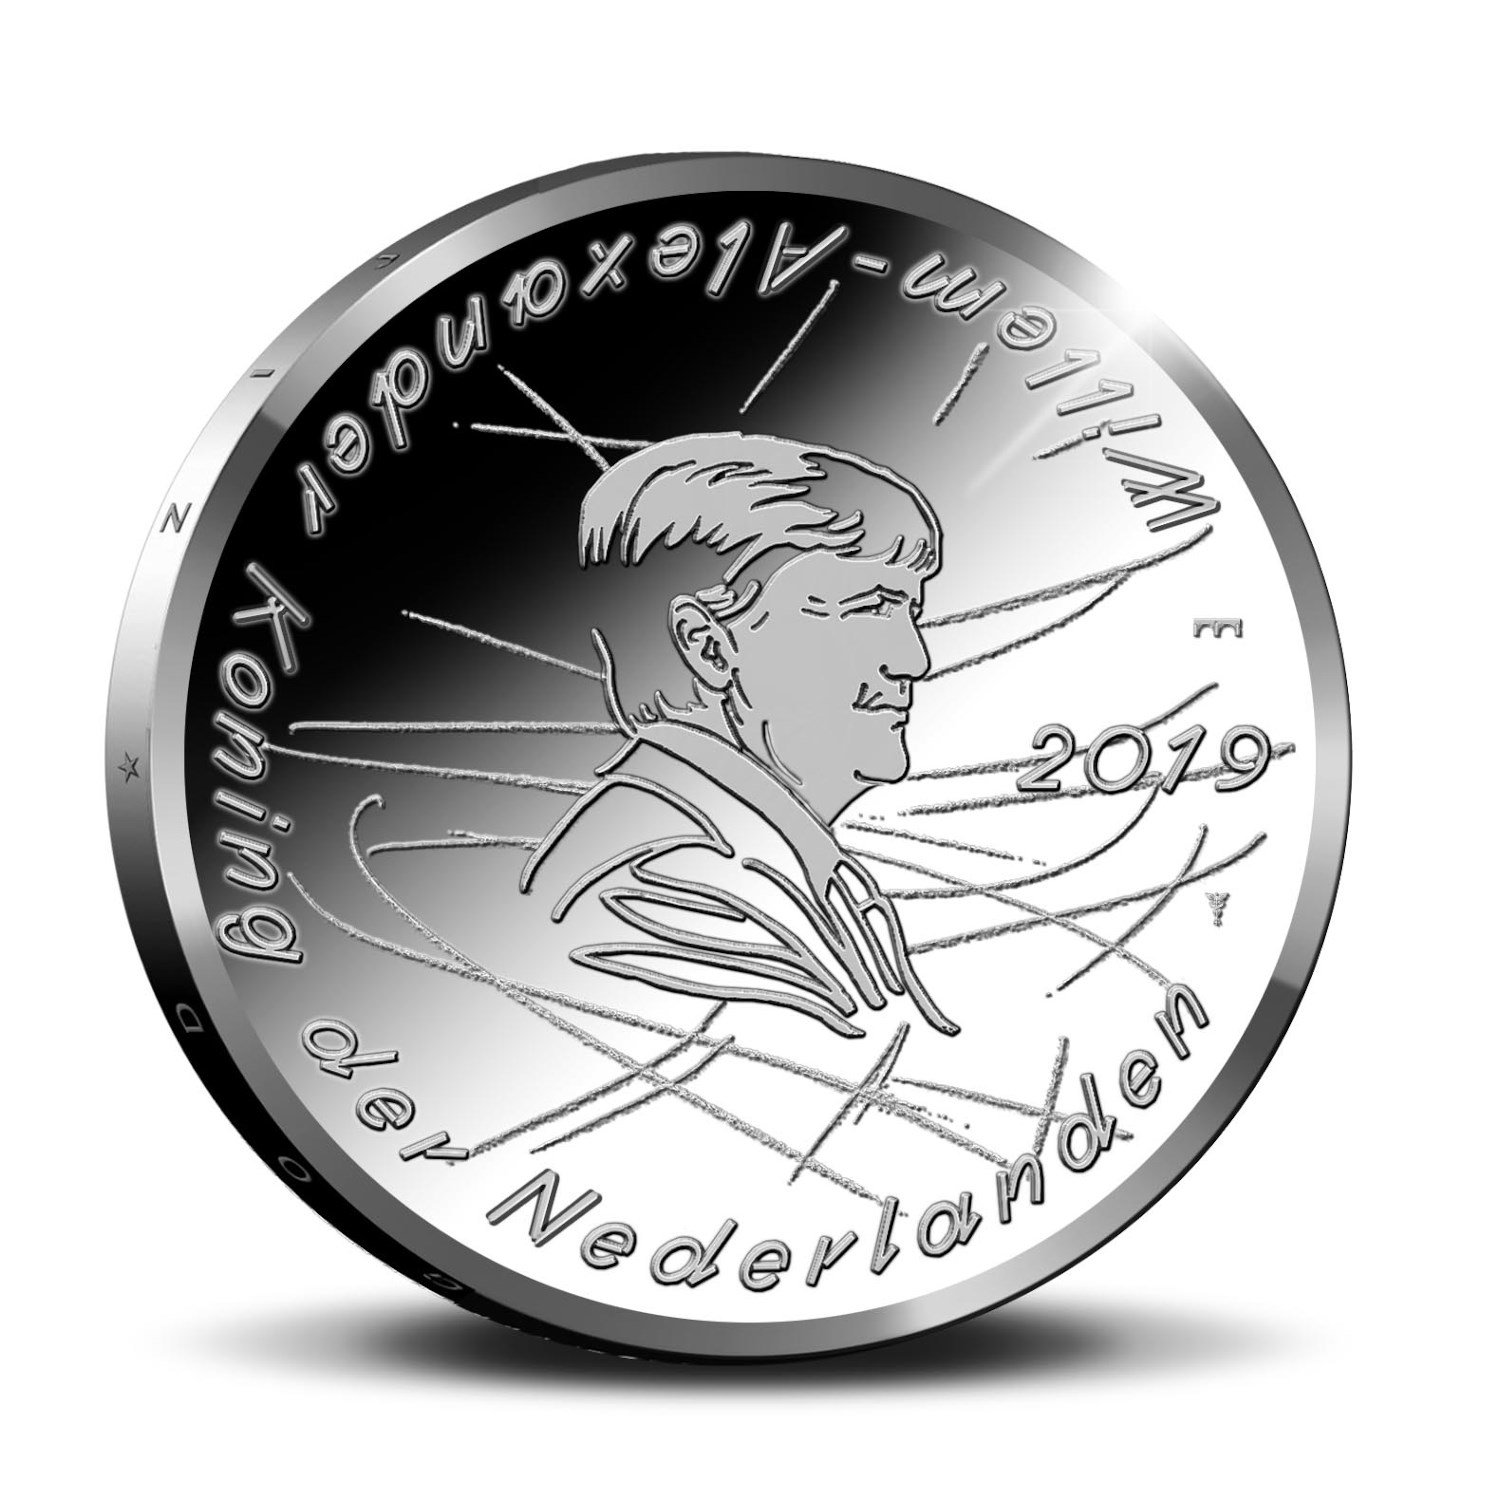 2019 Jaap EDEN commemorative coins from the Netherlands